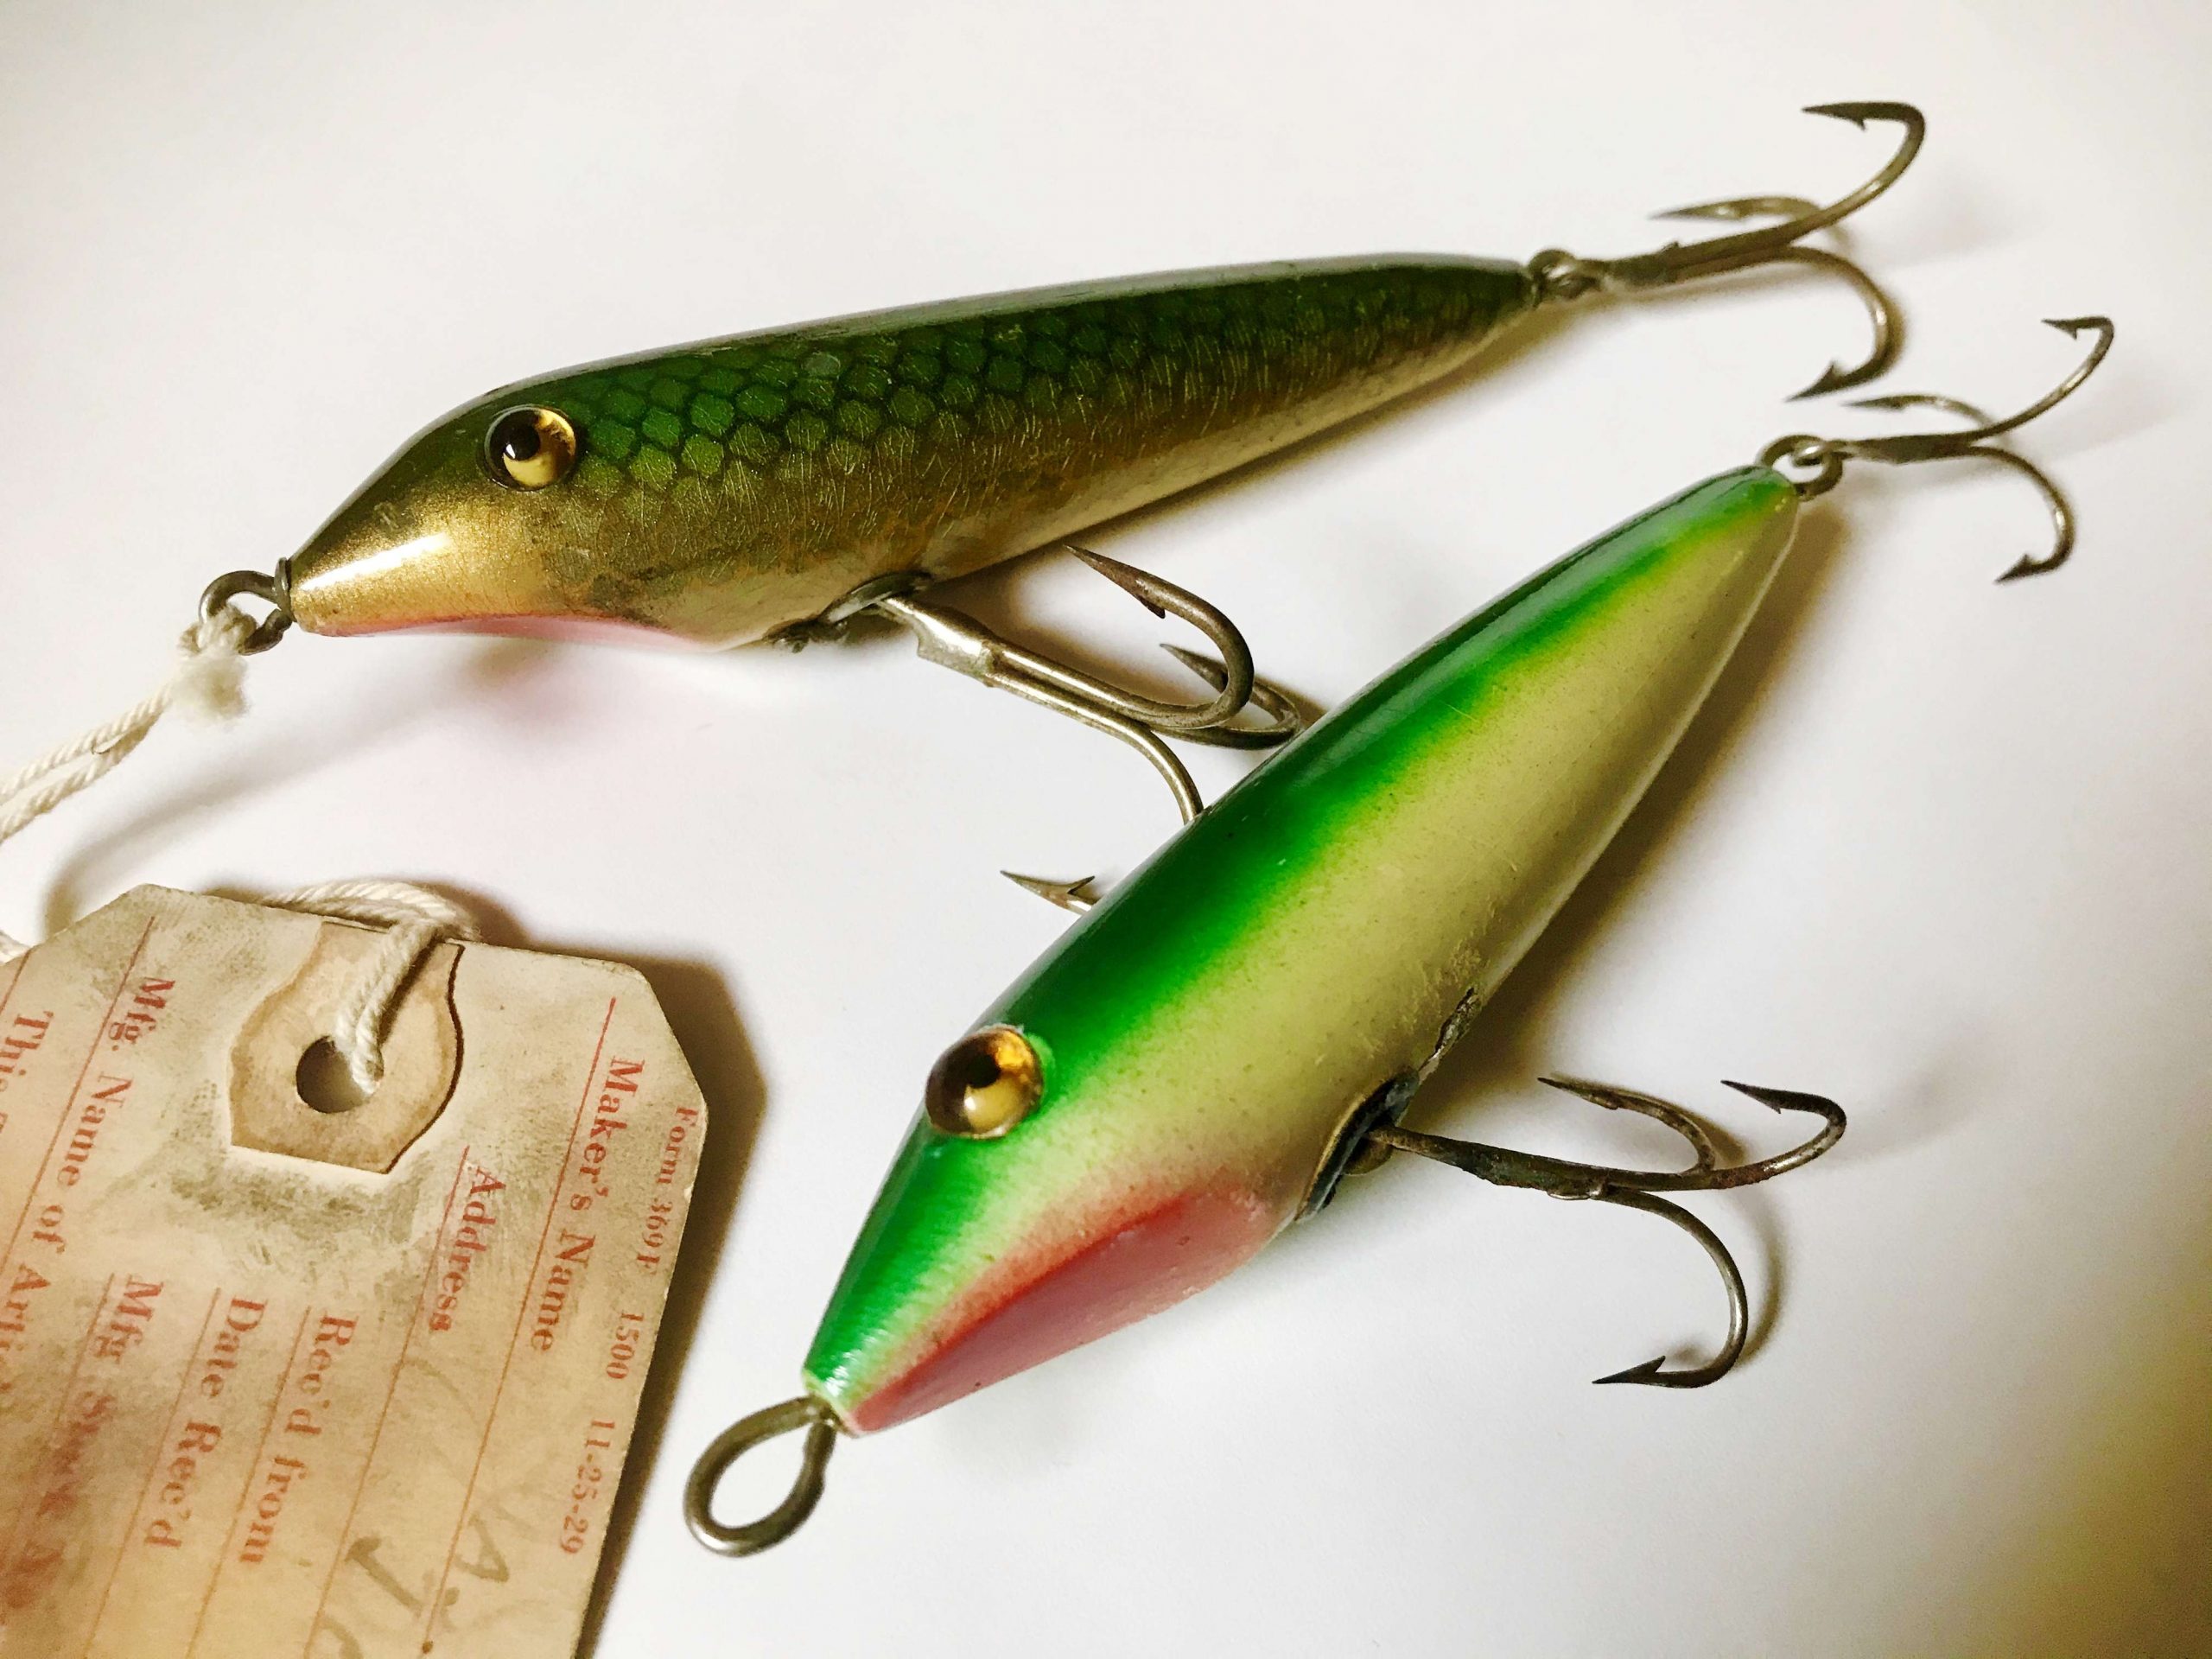 The first walking surface lure - Bassmaster